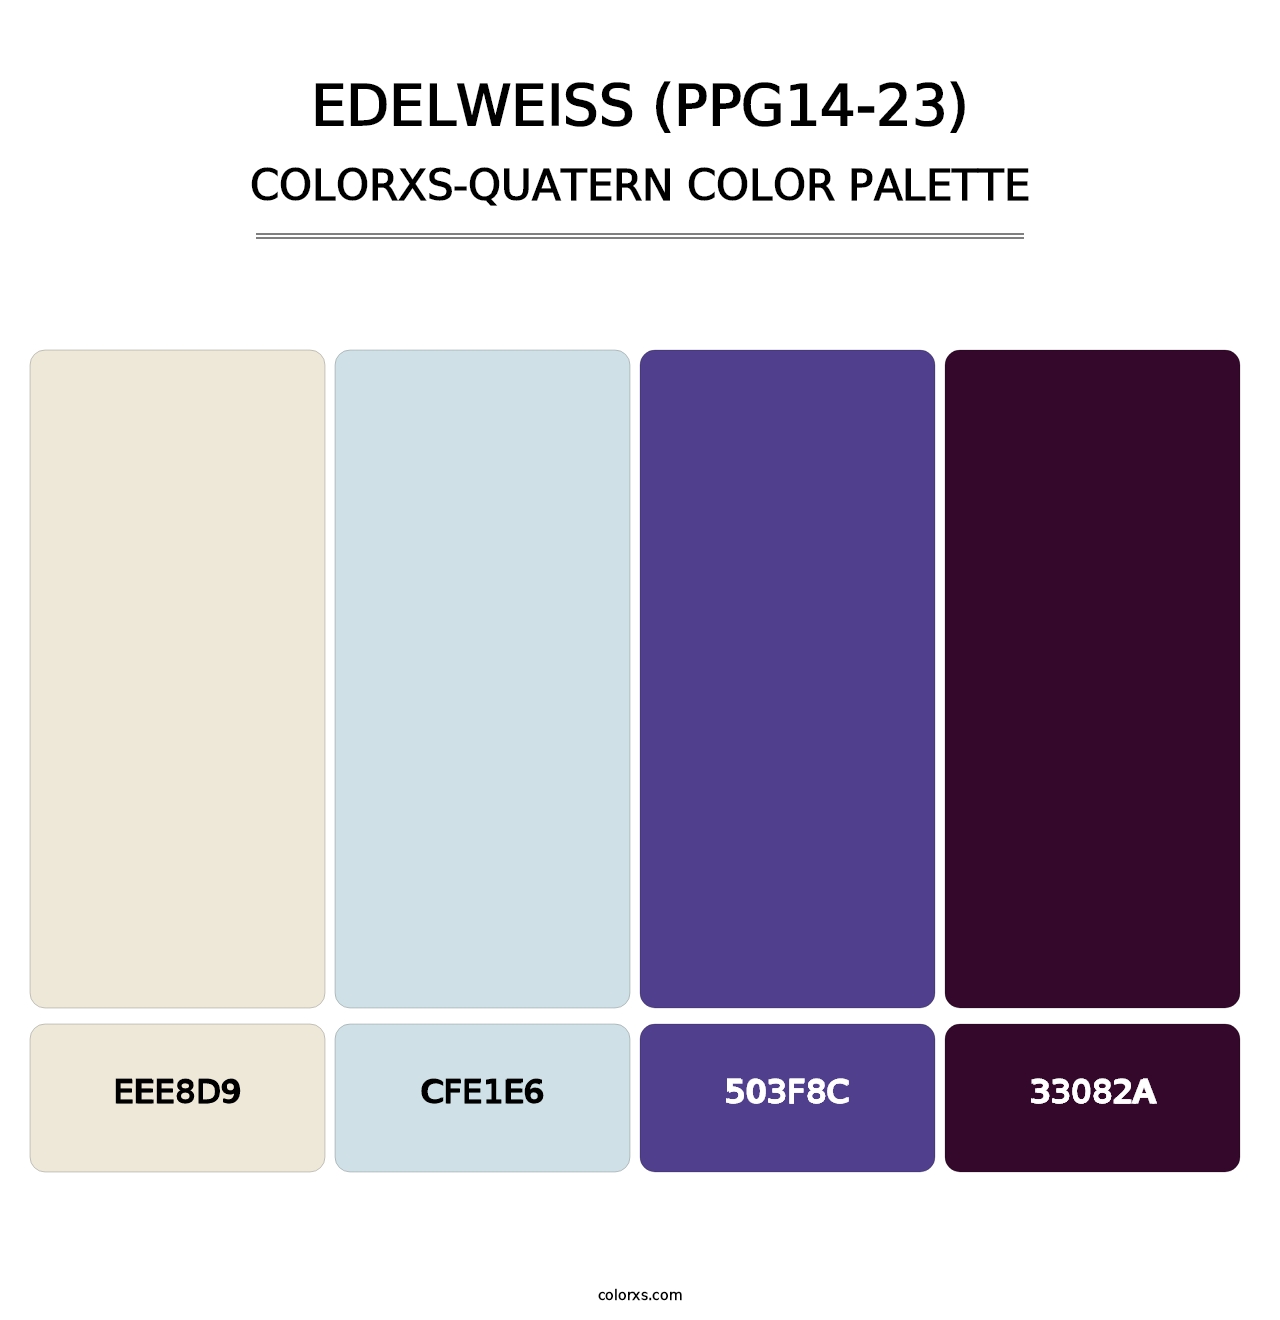 Edelweiss (PPG14-23) - Colorxs Quatern Palette